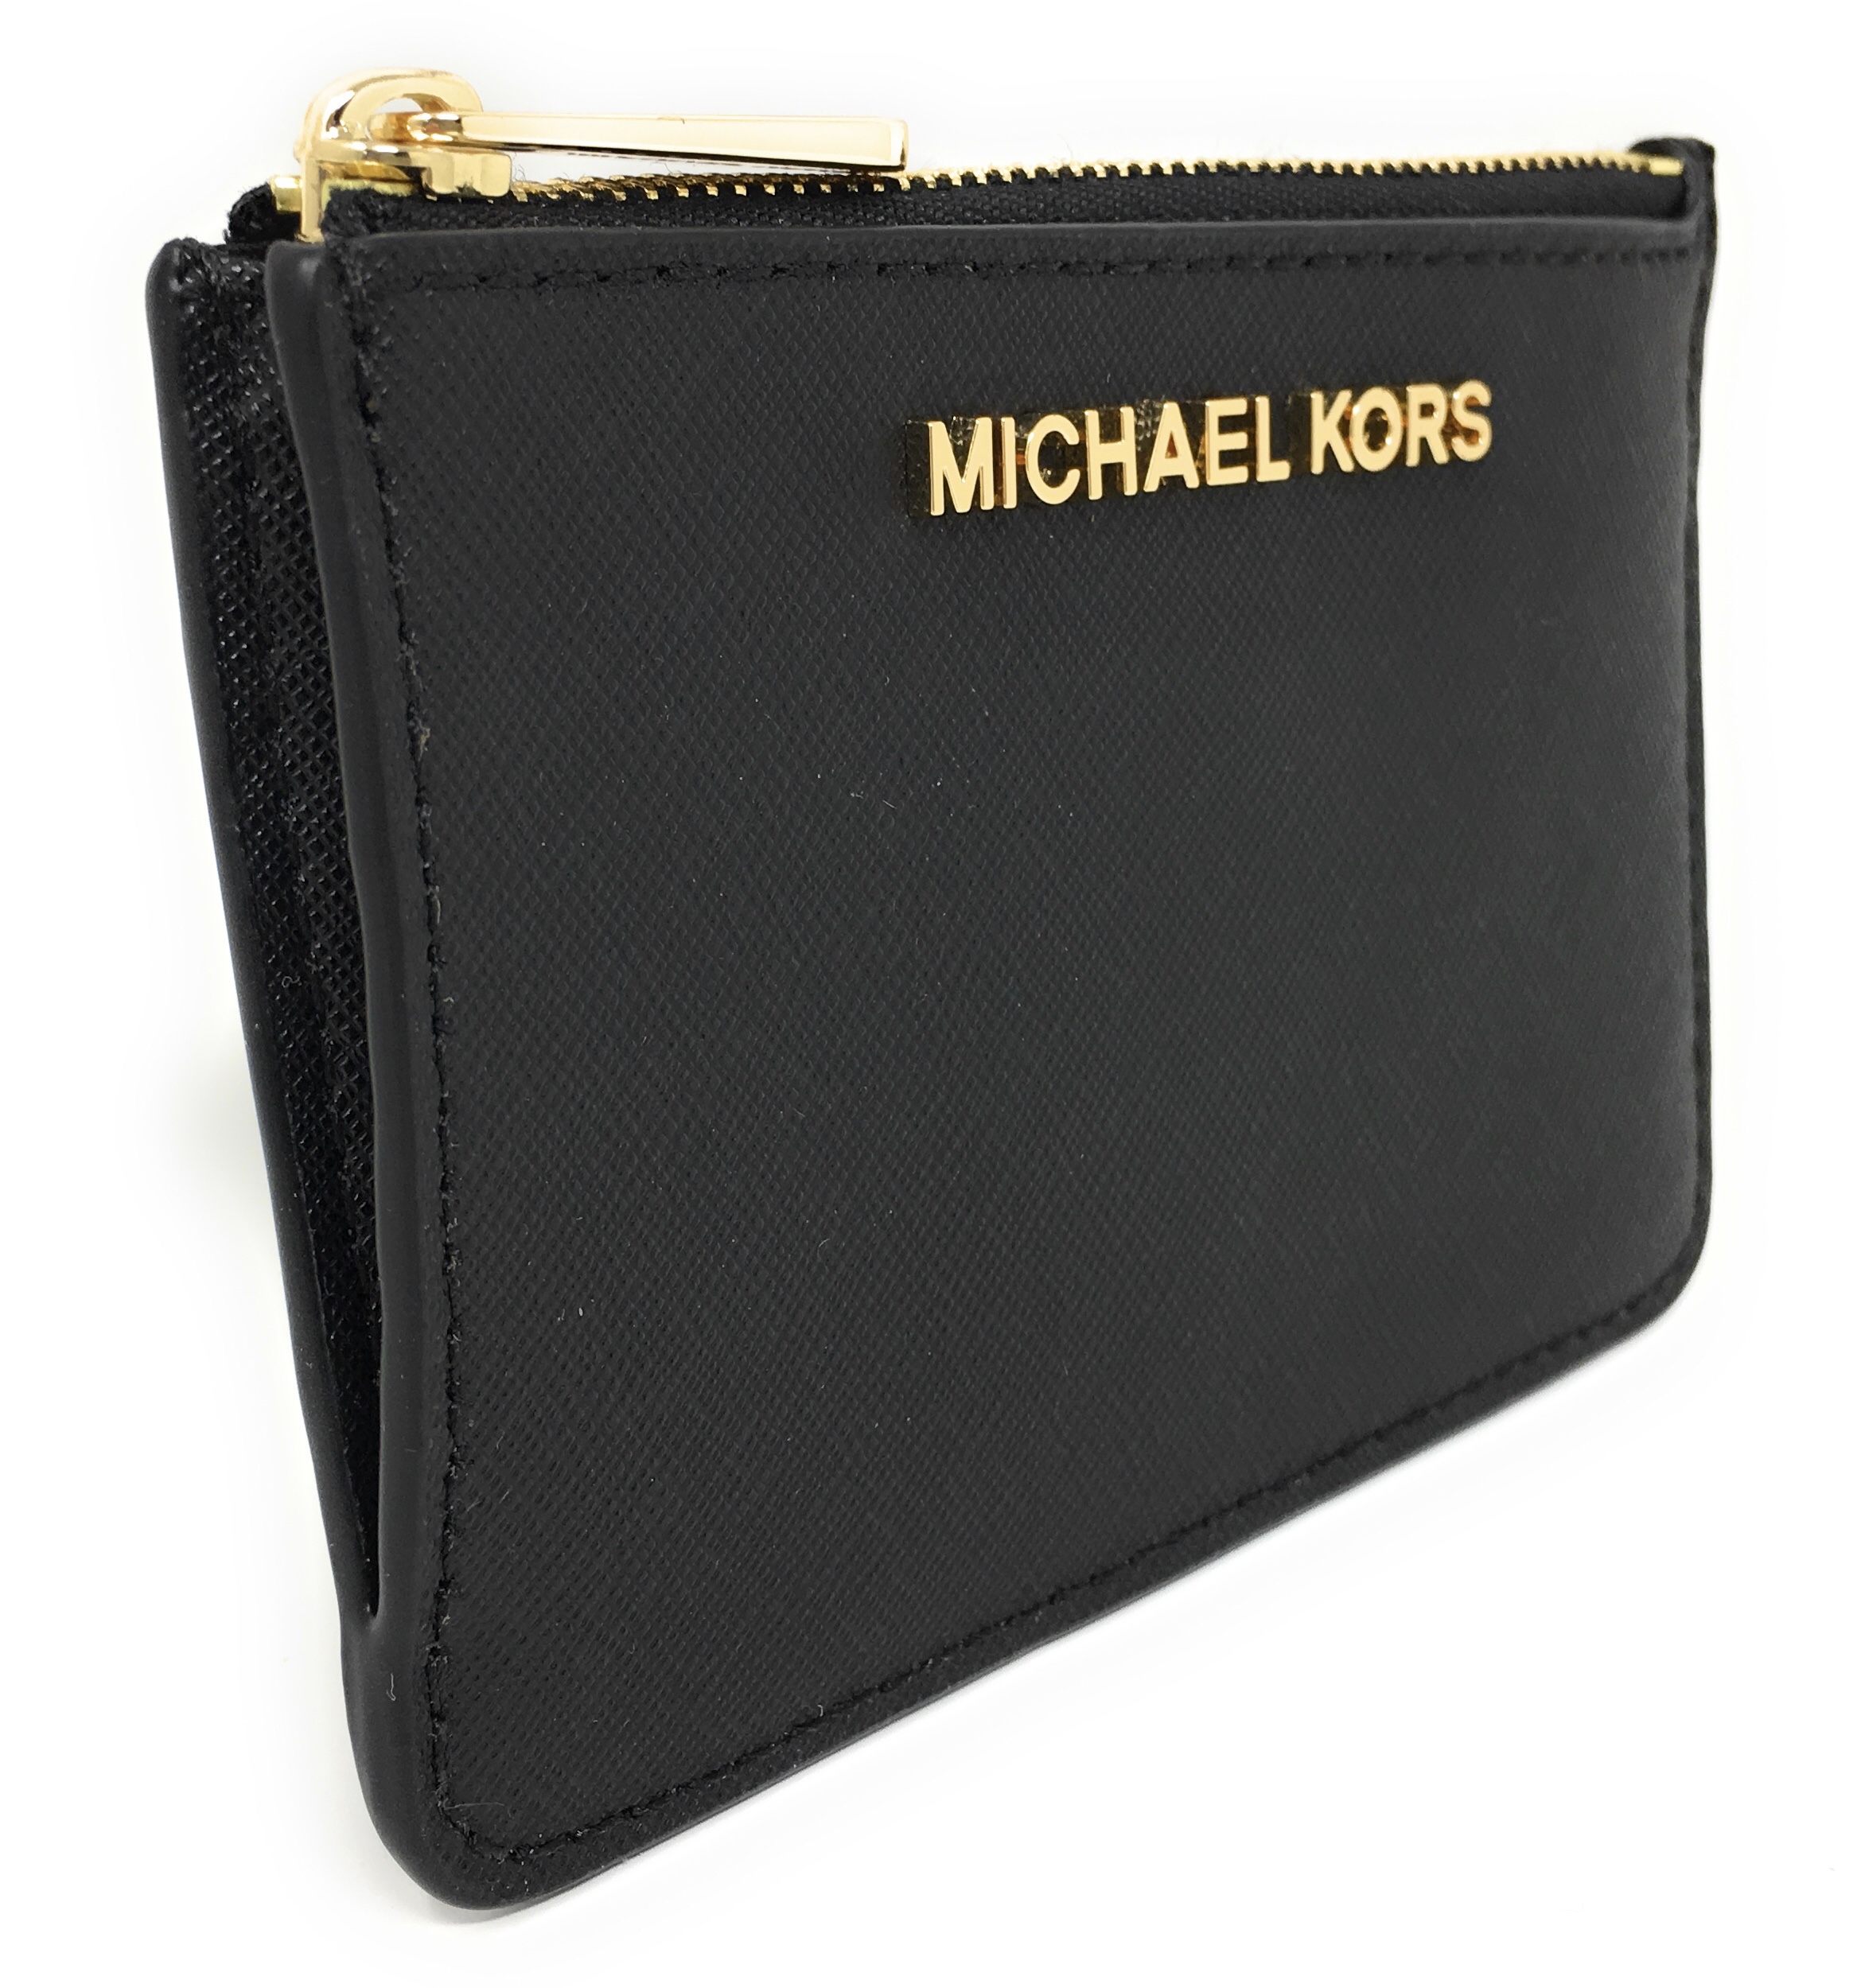 Michael Kors Jet Set Travel Small Top Zip Leather Coin Pouch / Wallet - Black - image 3 of 7